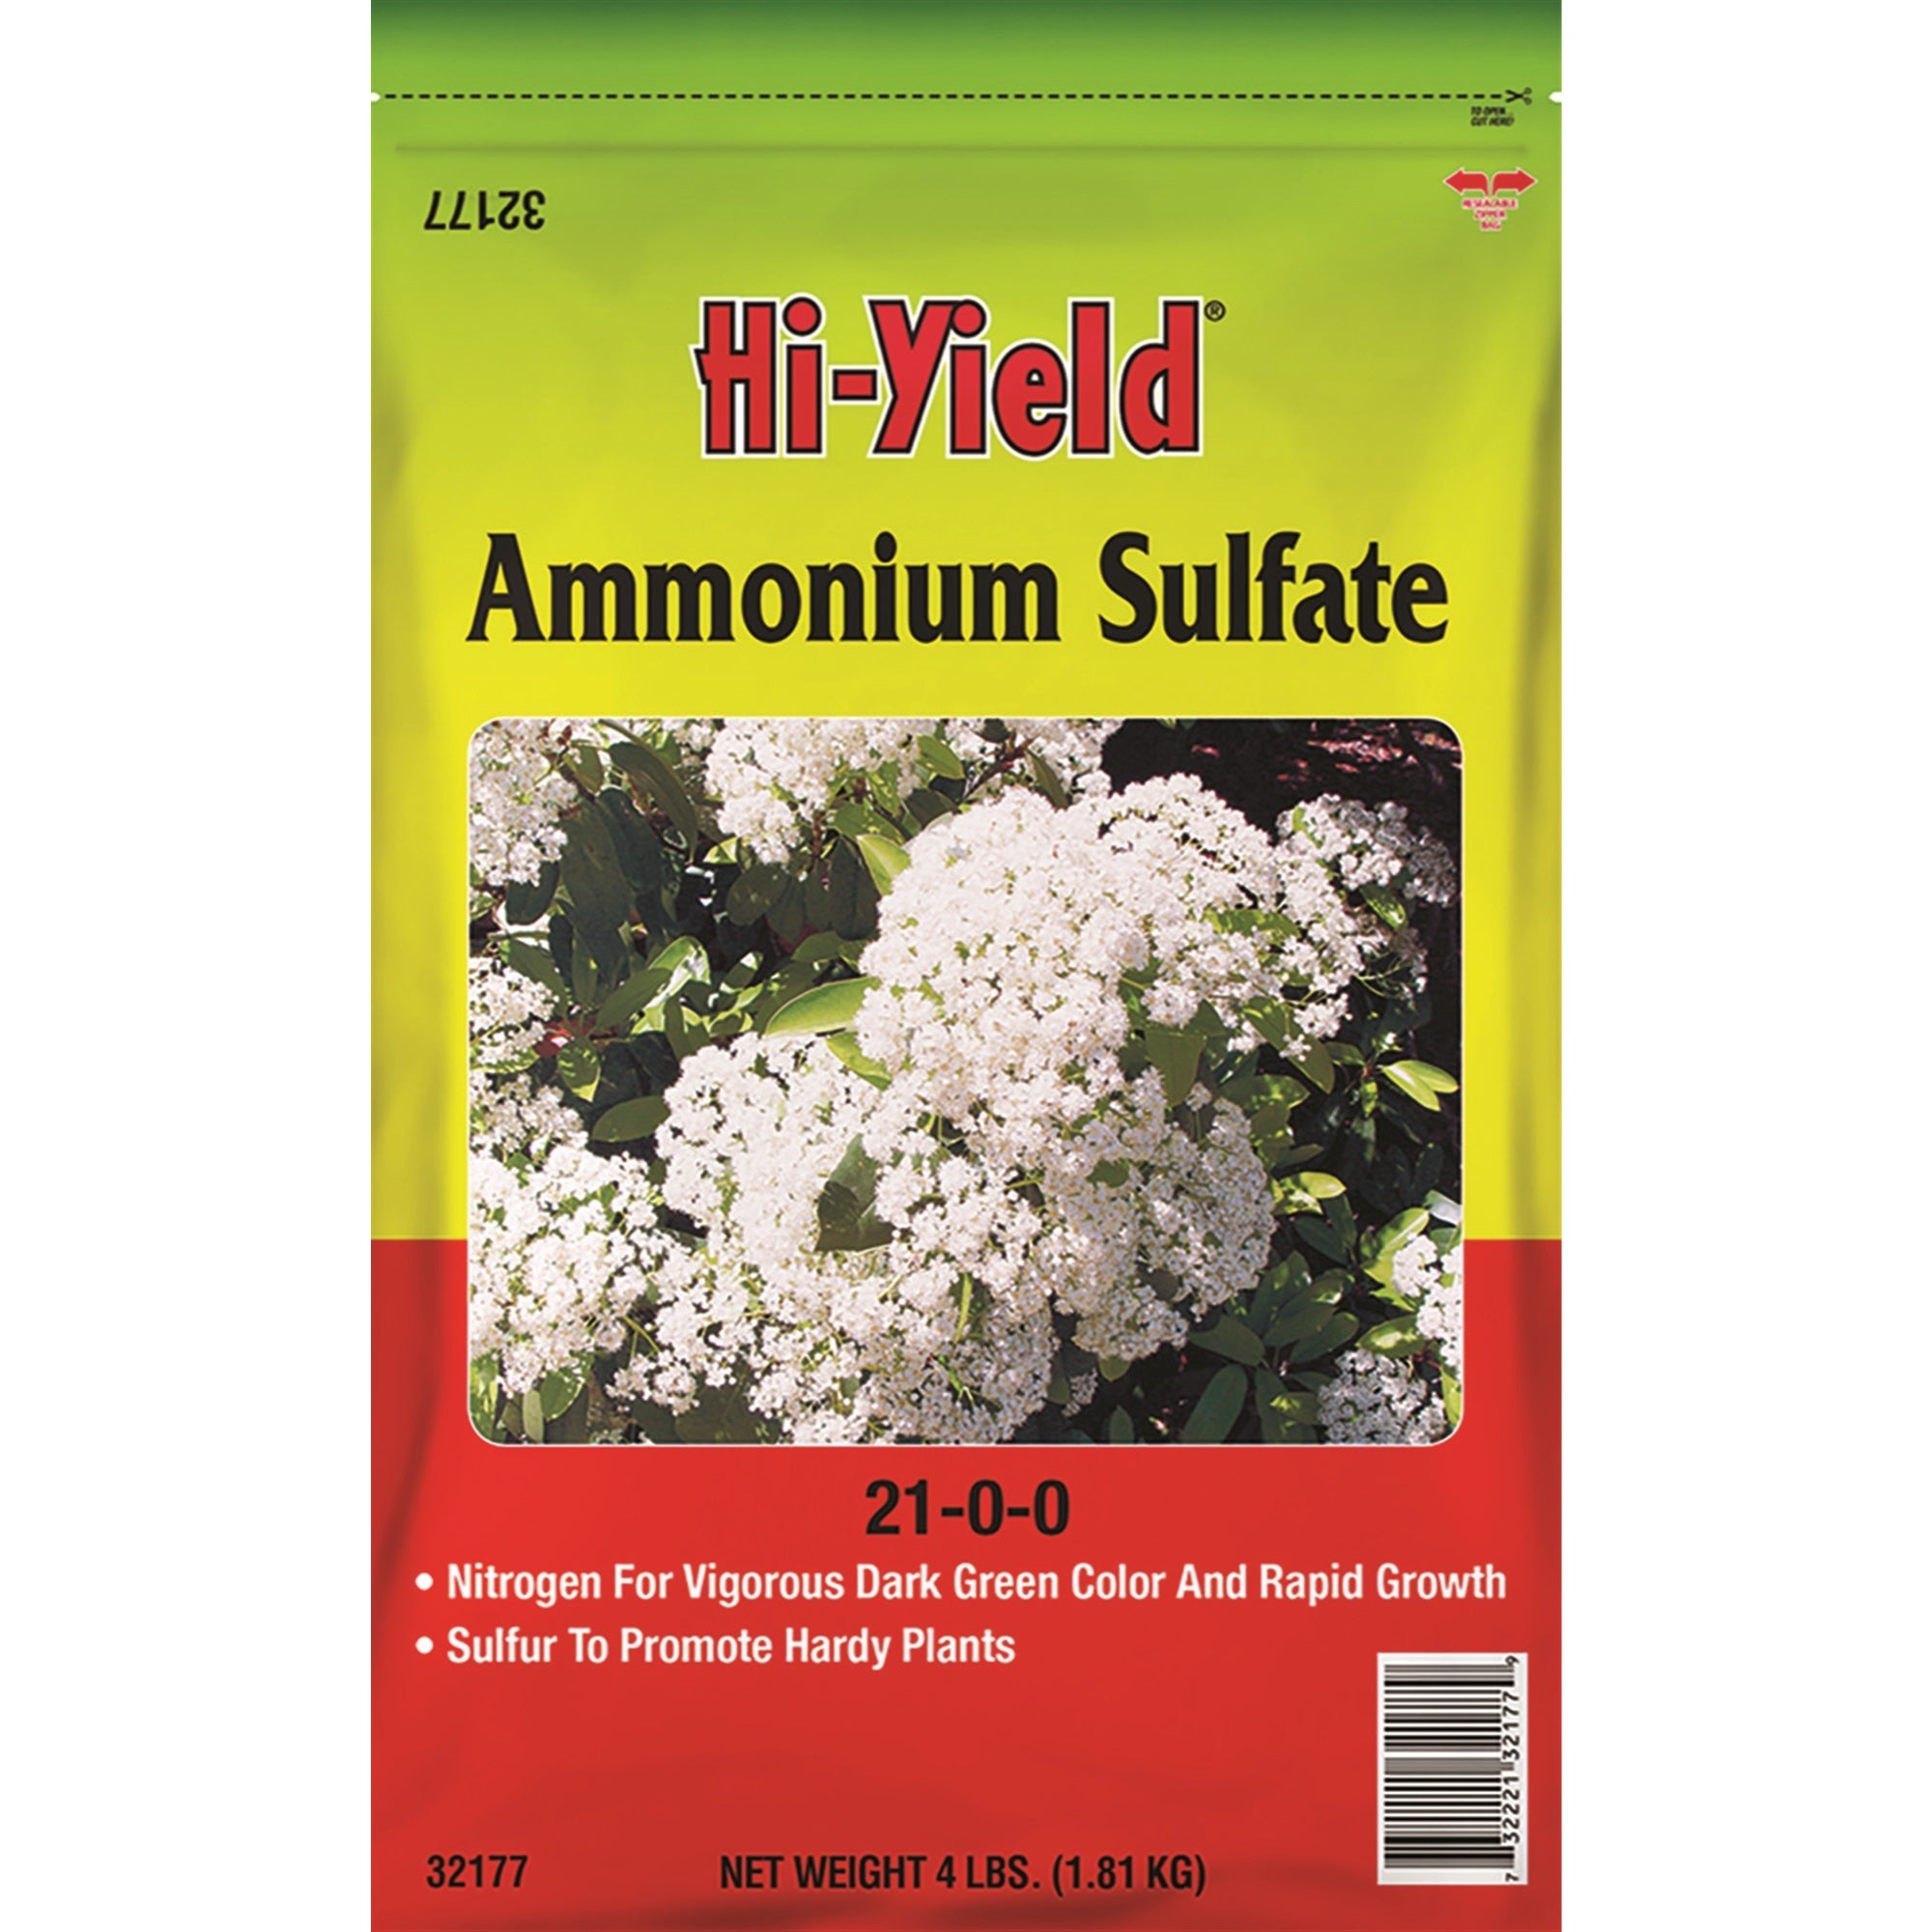 Hi-yield Ammonium Sulfate Lawn and Garden Plant Food, Granules